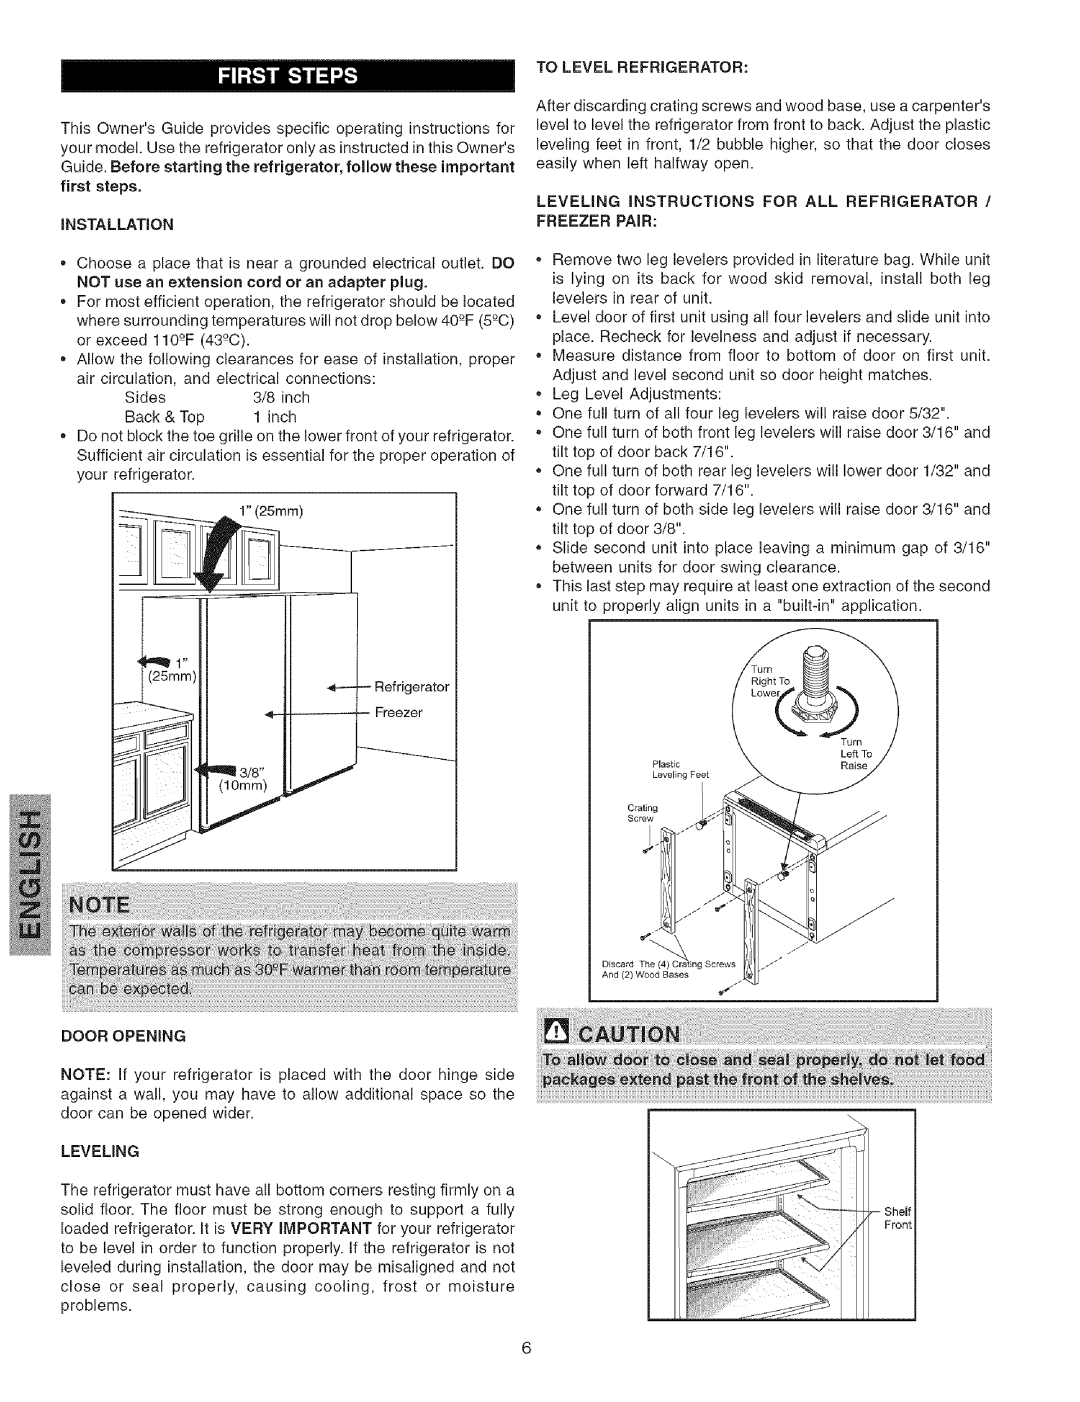 Kenmore 44823 manual LEVEMNG iNSTRUCTIONS FOR ALL REFRIGERATOR, Installation, Freezer Pair, Leveling 